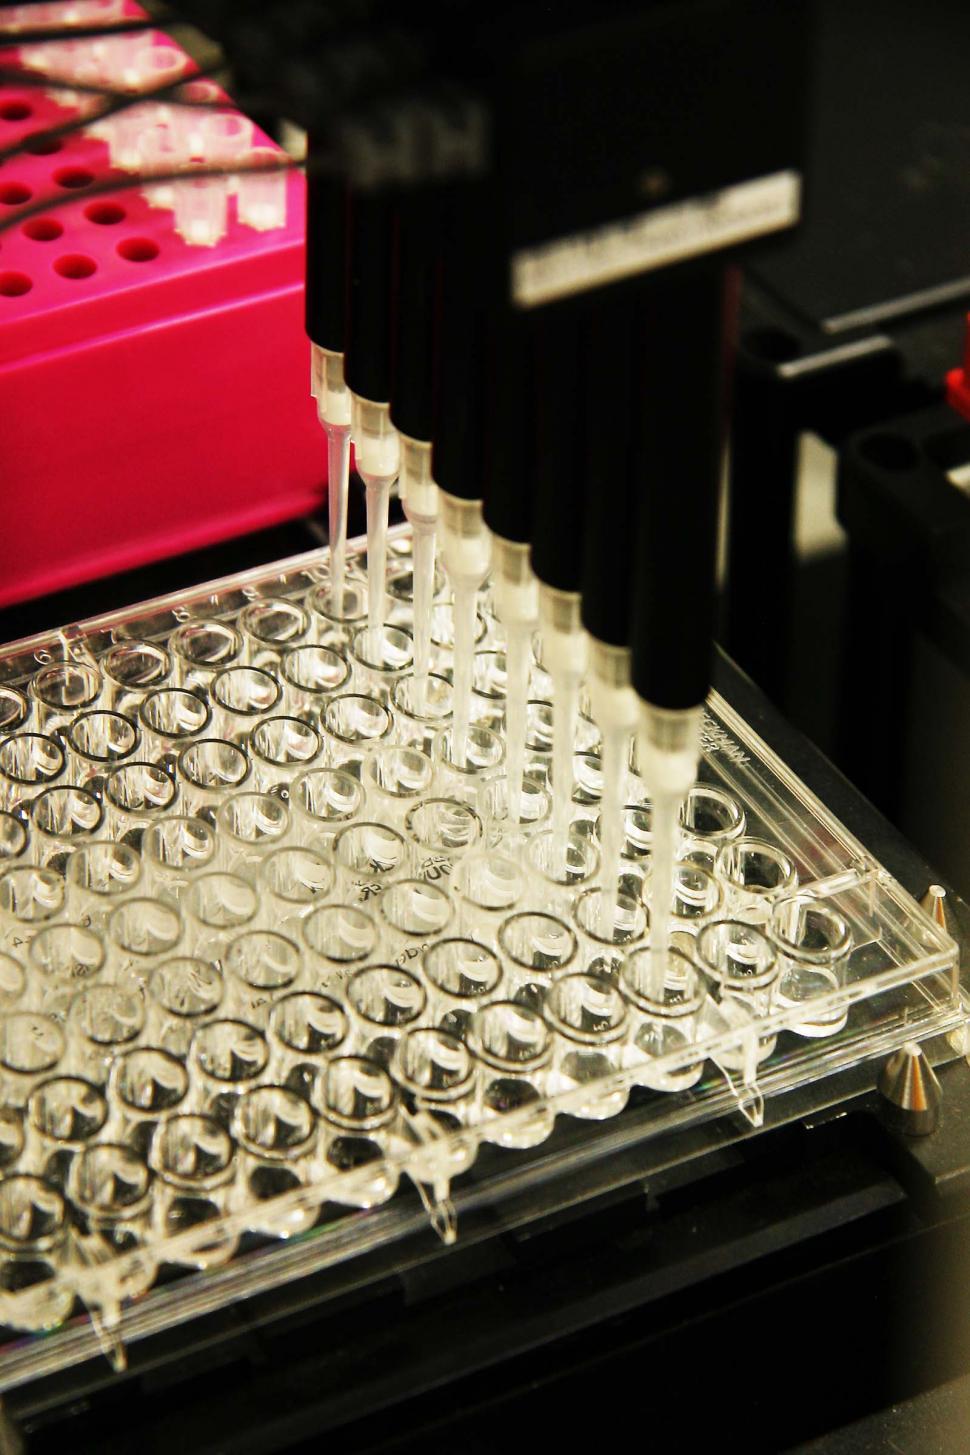 Free Image of Pipette Automation 